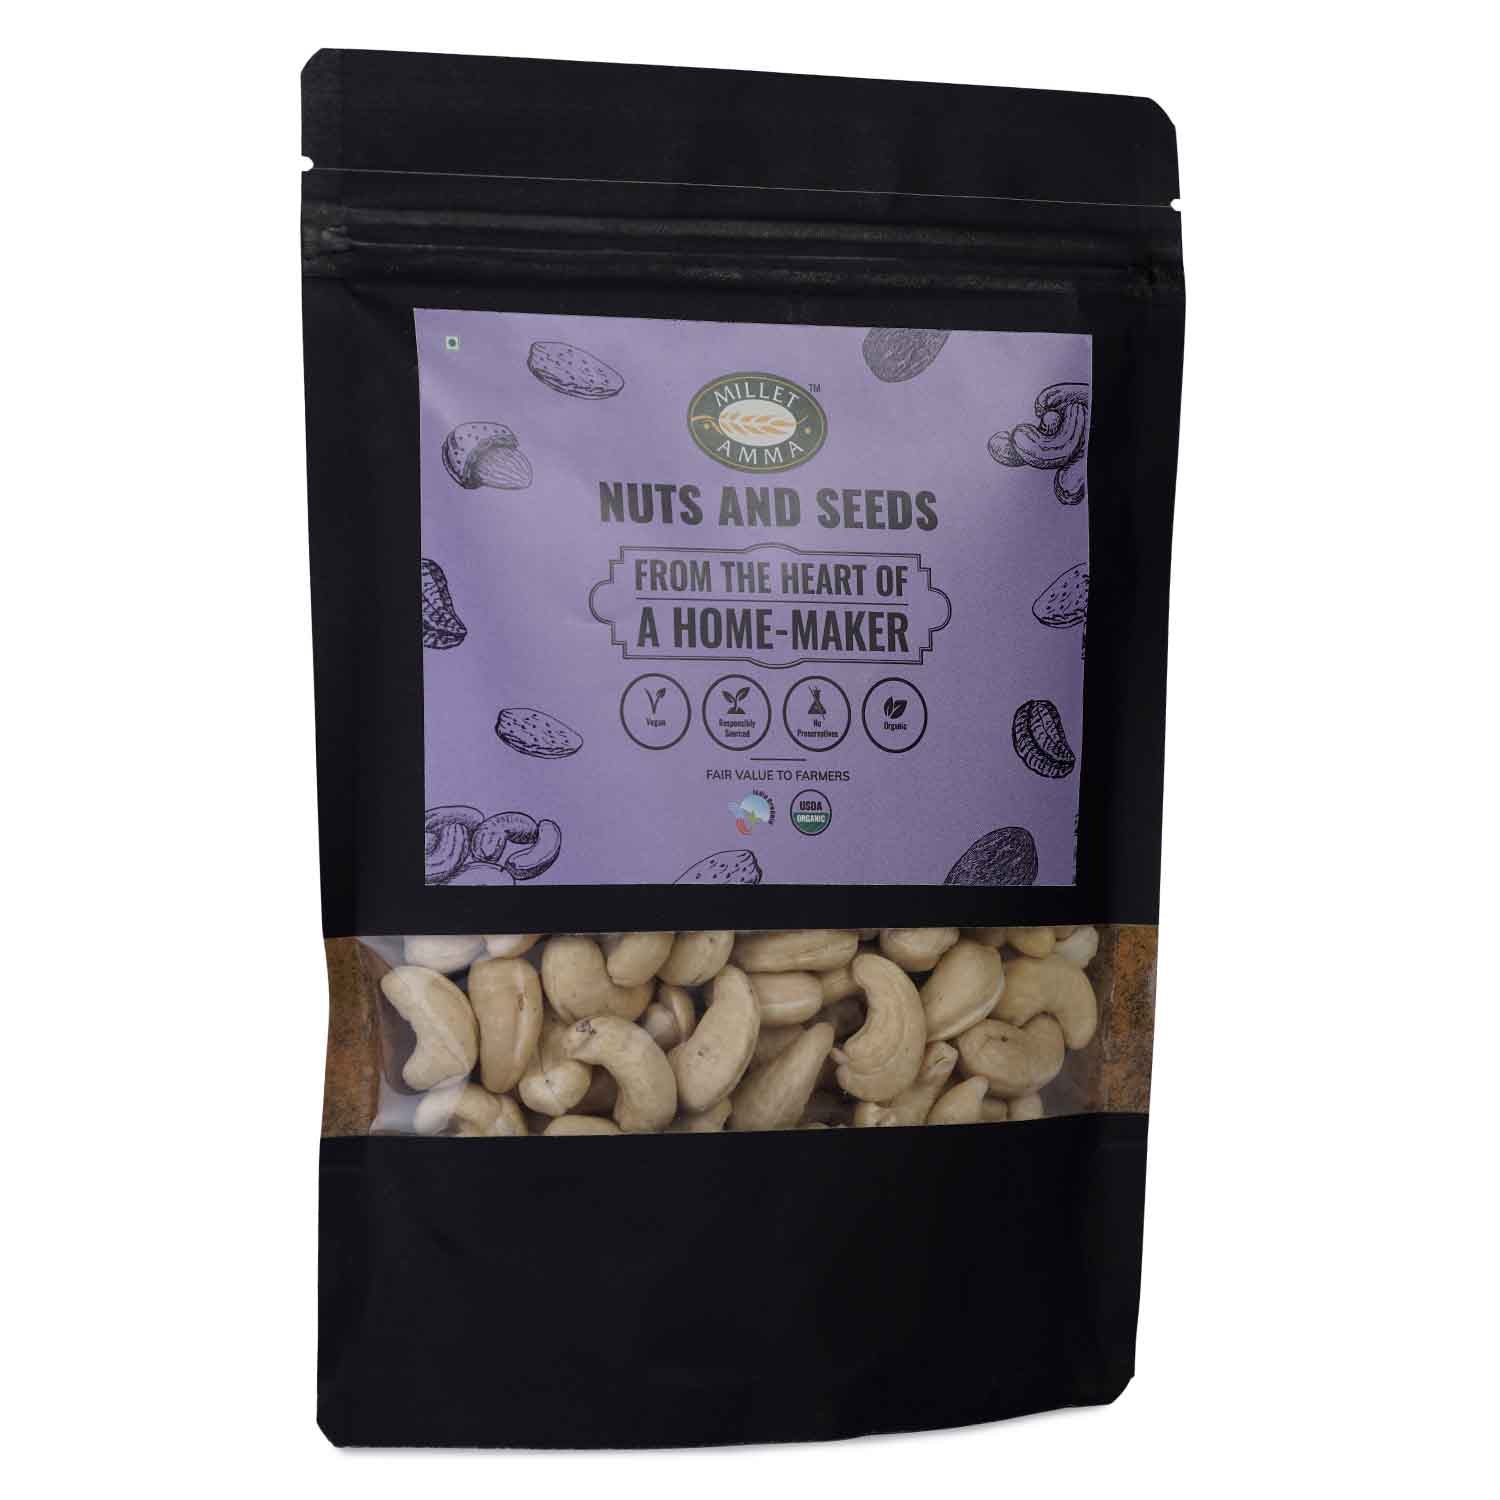 Milletamma’s cashews are rich in healthy fatty acids, proteins and antioxidants.  It contains numerous phytochemicals that helps in preventing cancer.